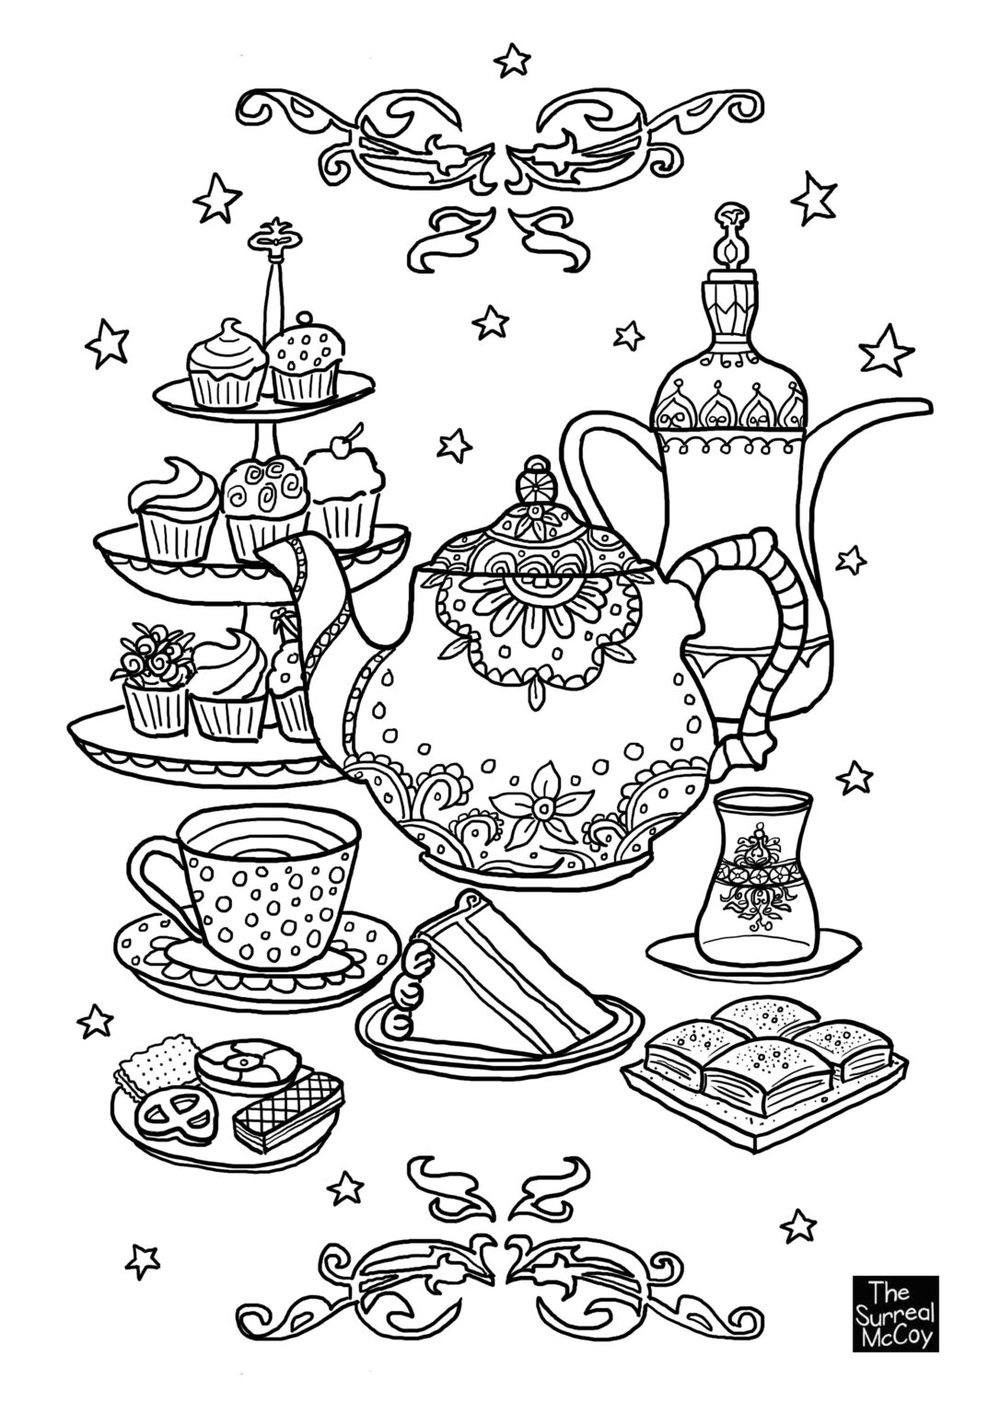 The Great British Colouring Book - Jam exclusive!